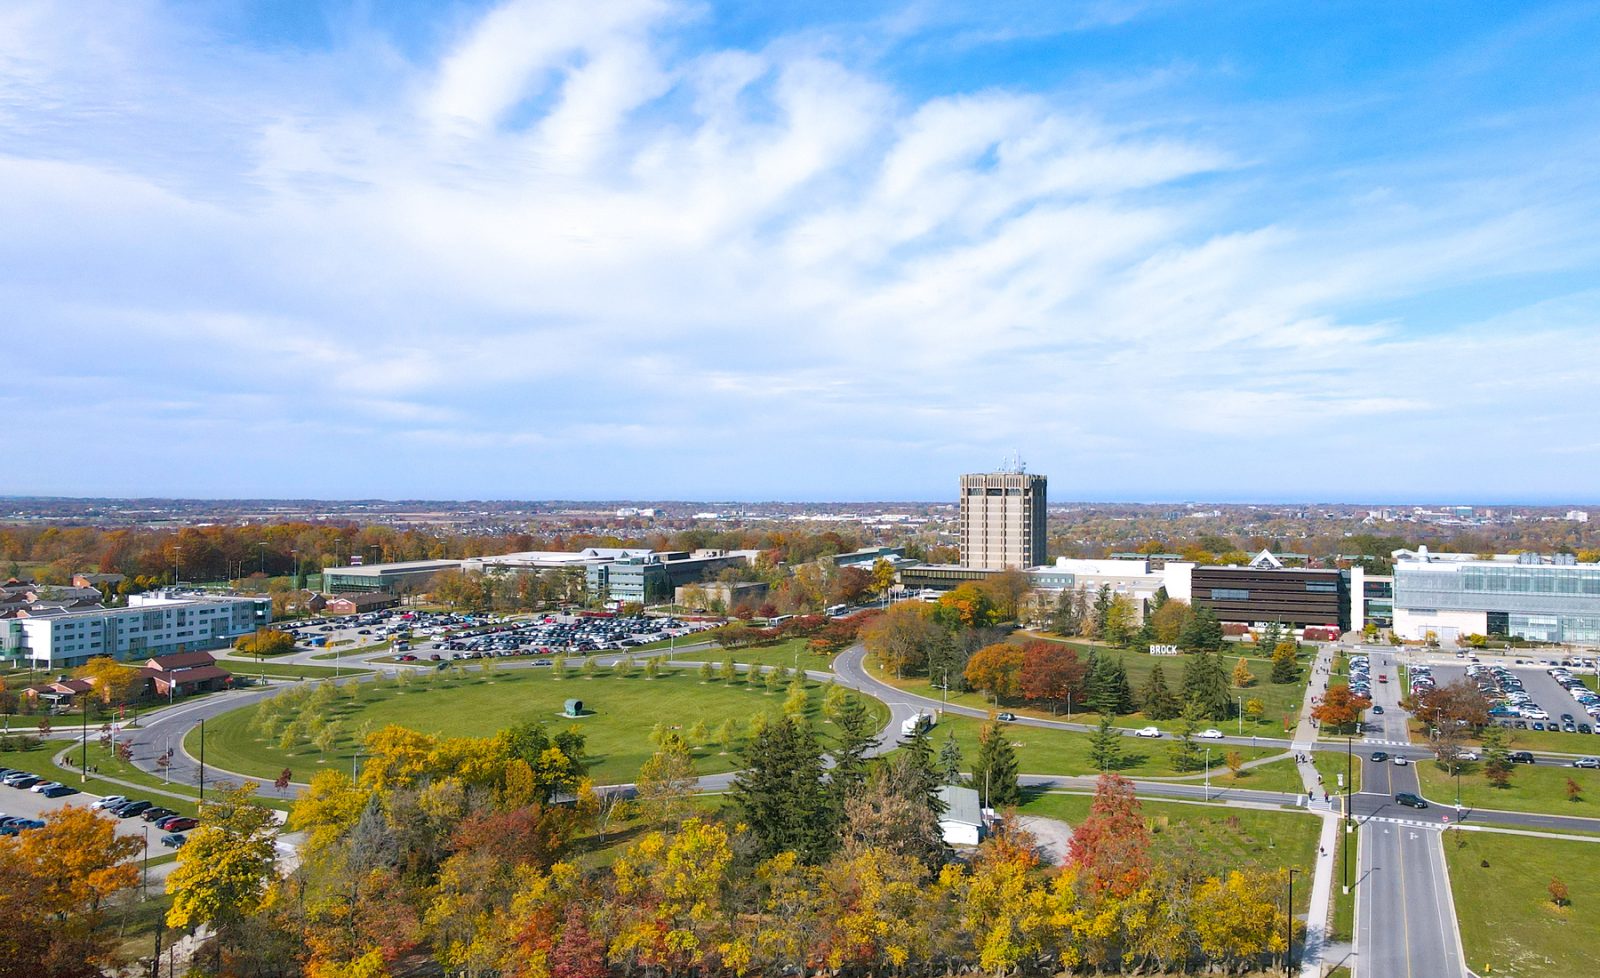 Brock University's main campus seen from an aerial view with an abundance of green space and trees in the foreground.